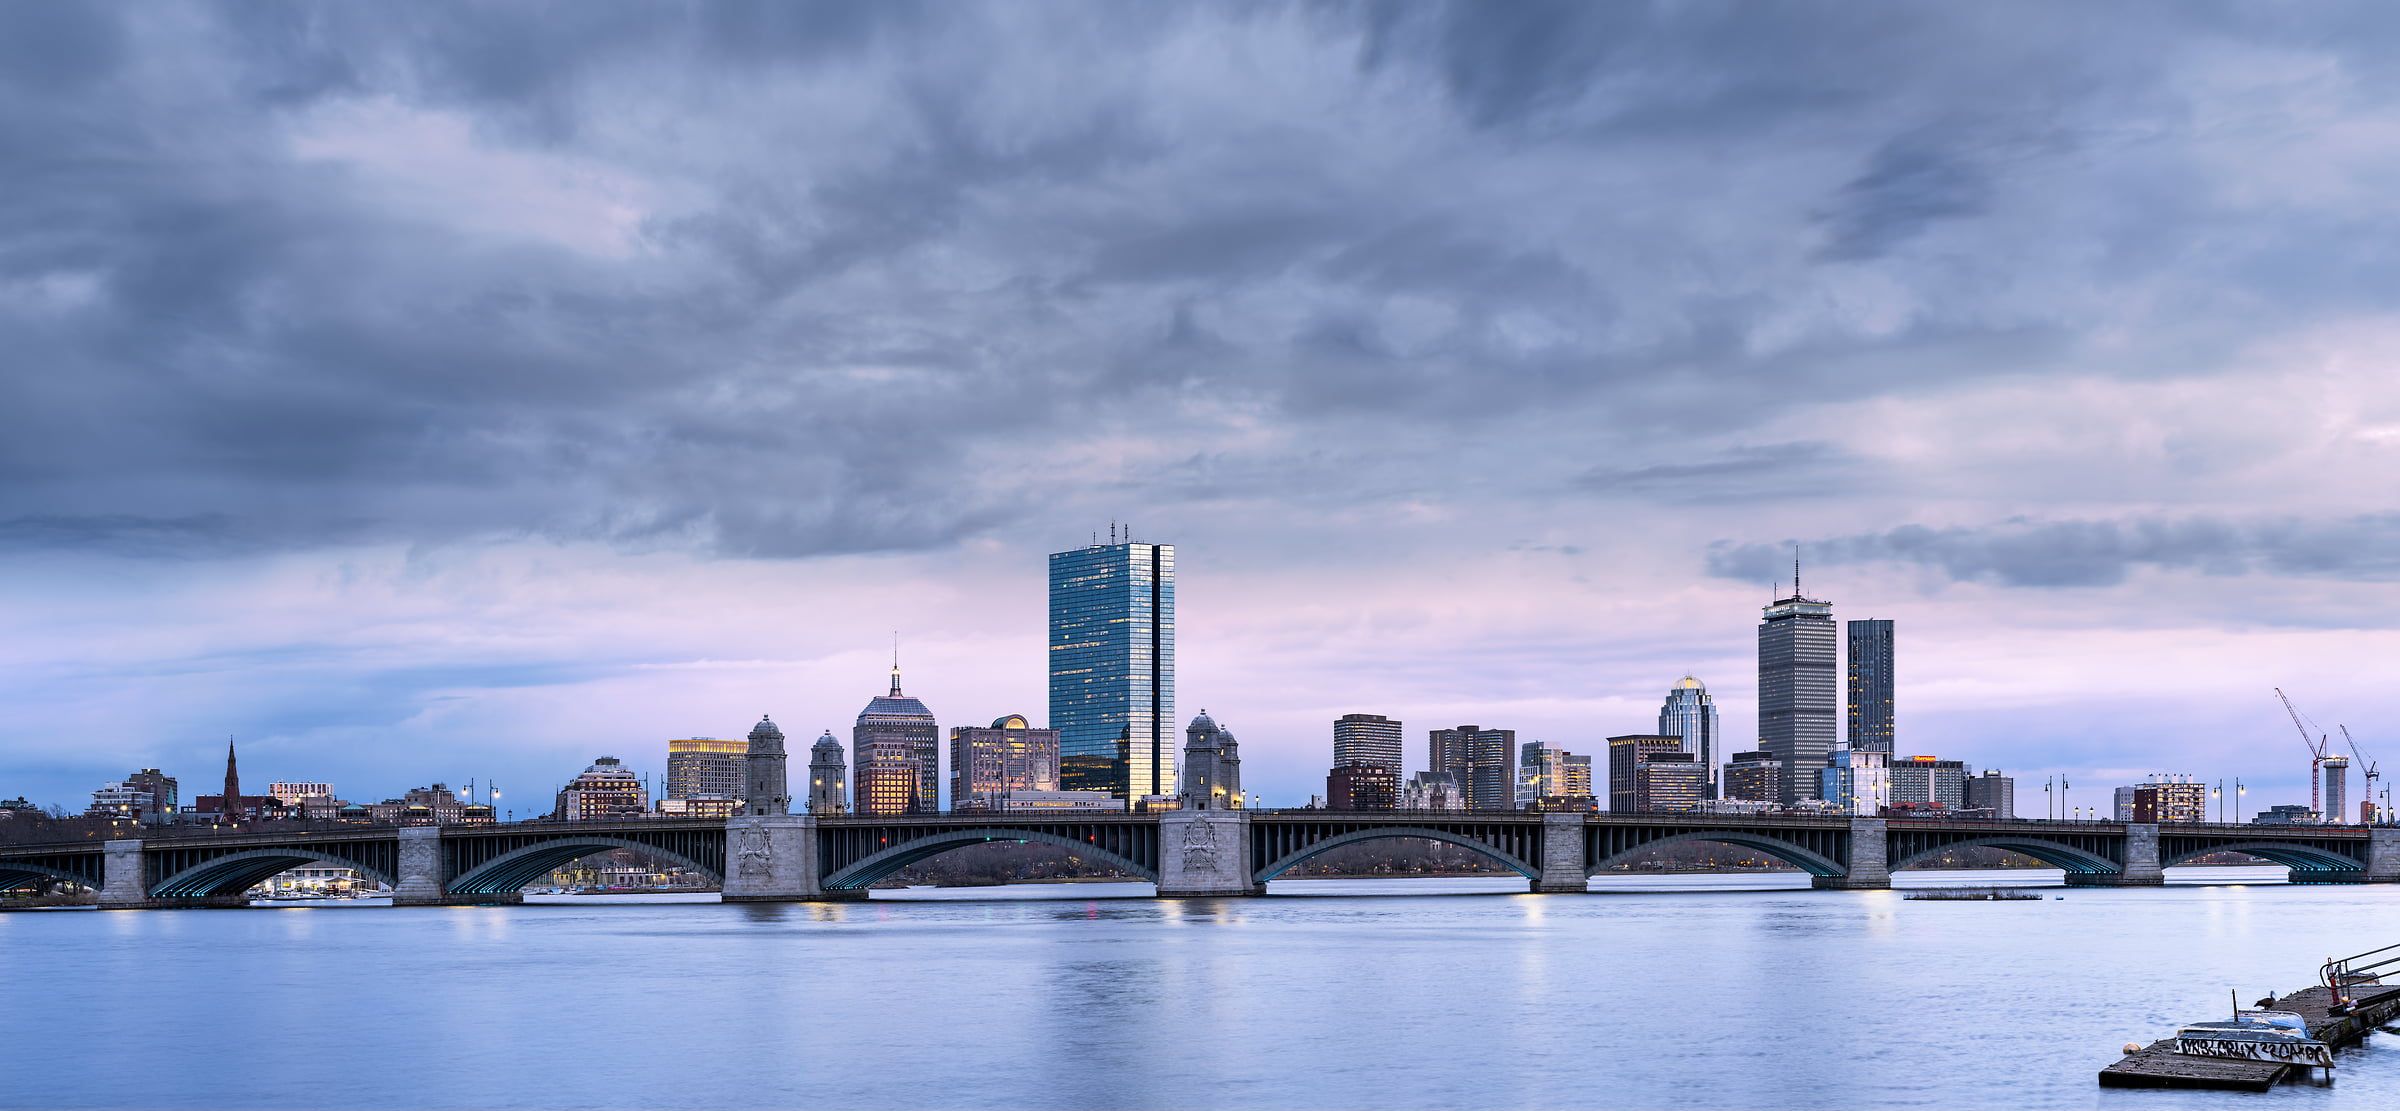 663 megapixels! A very high resolution, large-format VAST photo print of Longfellow Bridge in Boston over the Charles River; photograph created by Chris Blake in Boston, Massachusetts